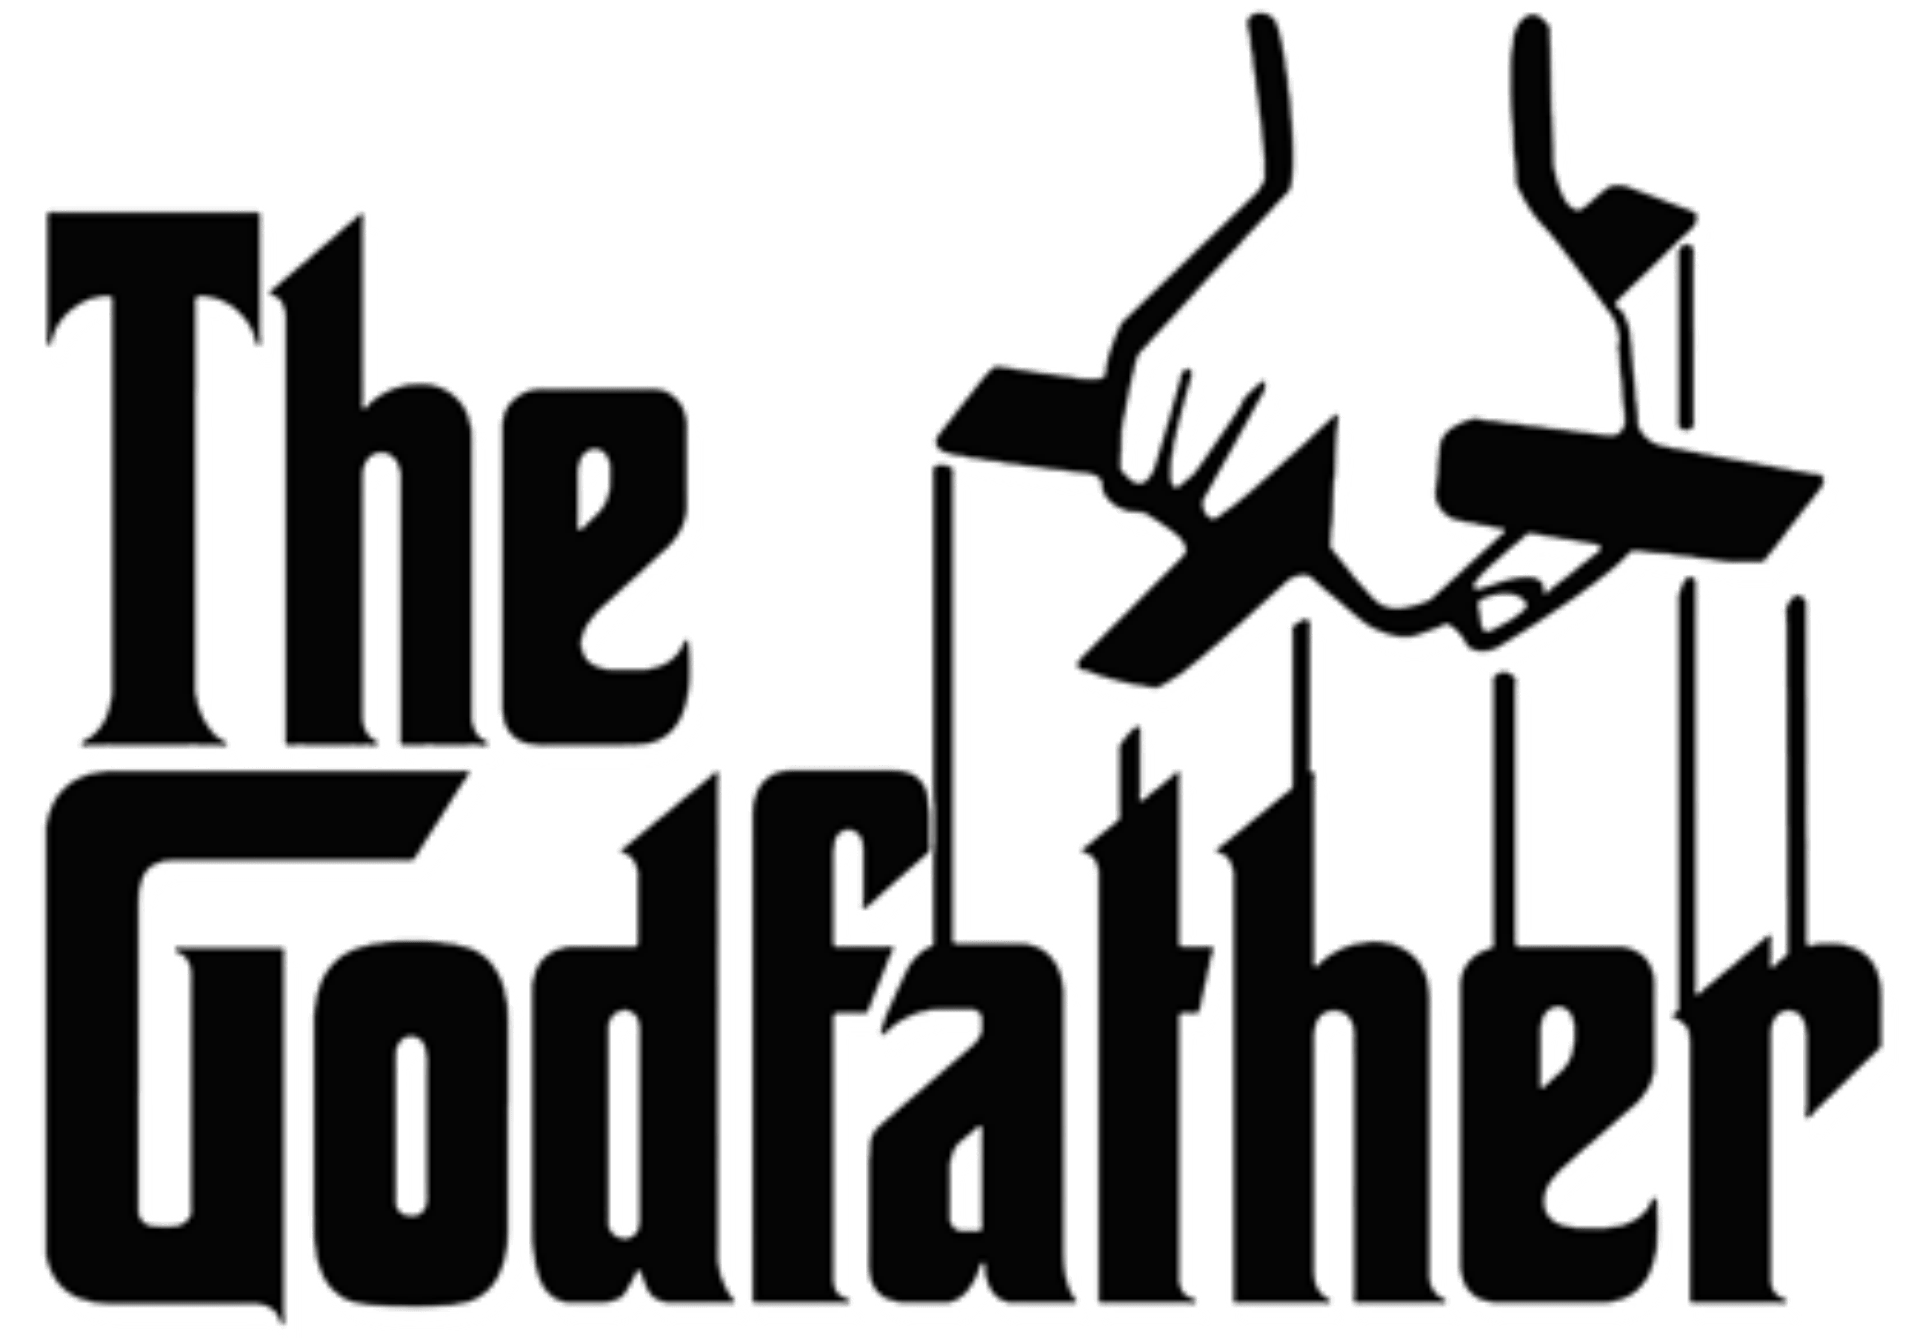 Black and White Movie Logo - File:The Godfather movie logo.png - Wikimedia Commons